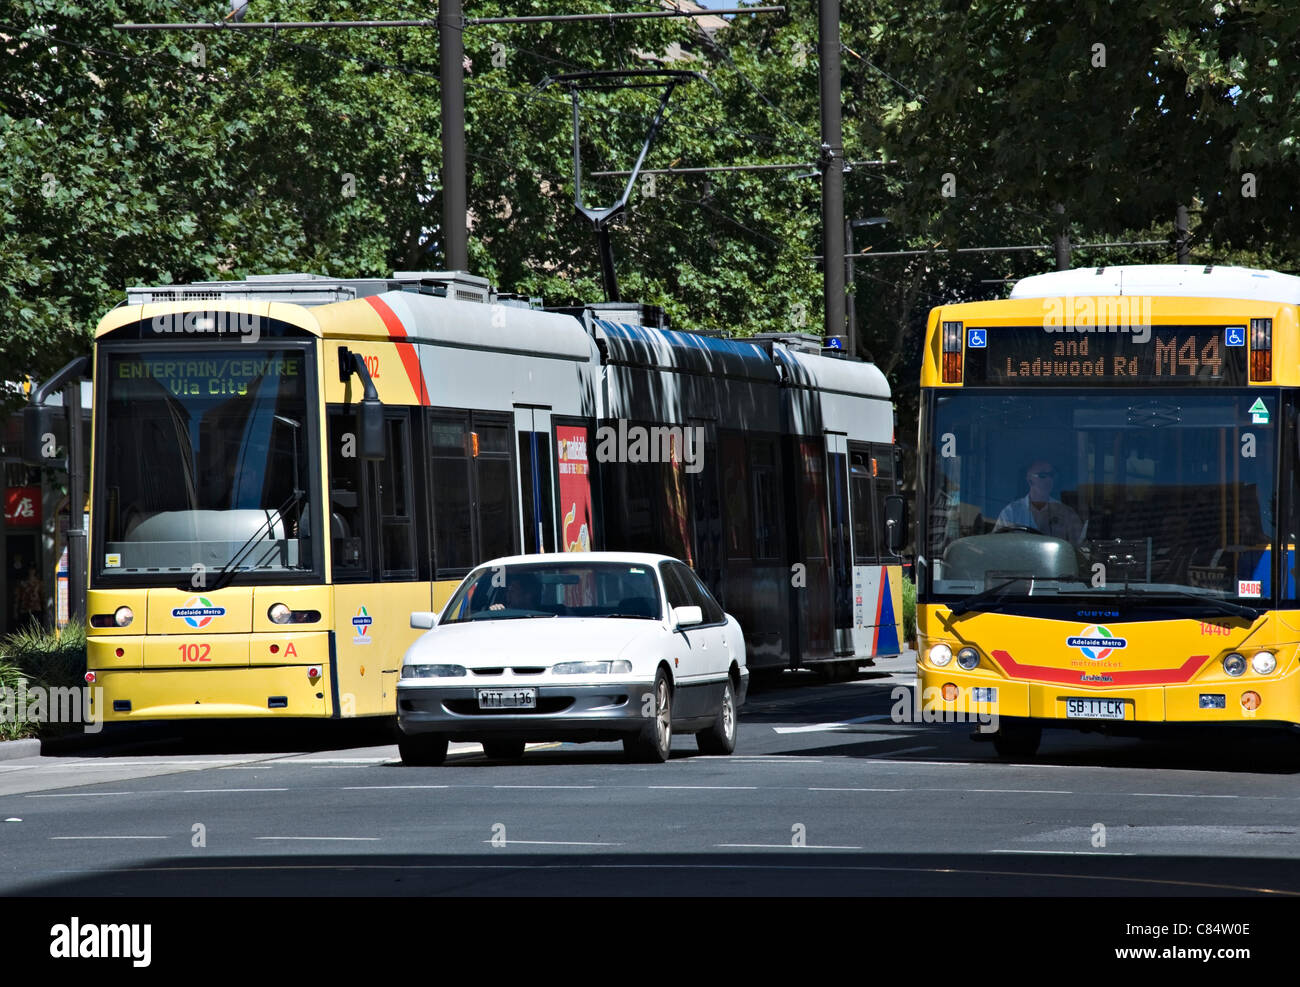 A Tram and Single Decker Bus form Part of the Adelaide Transport System in King William Street South Australia Stock Photo